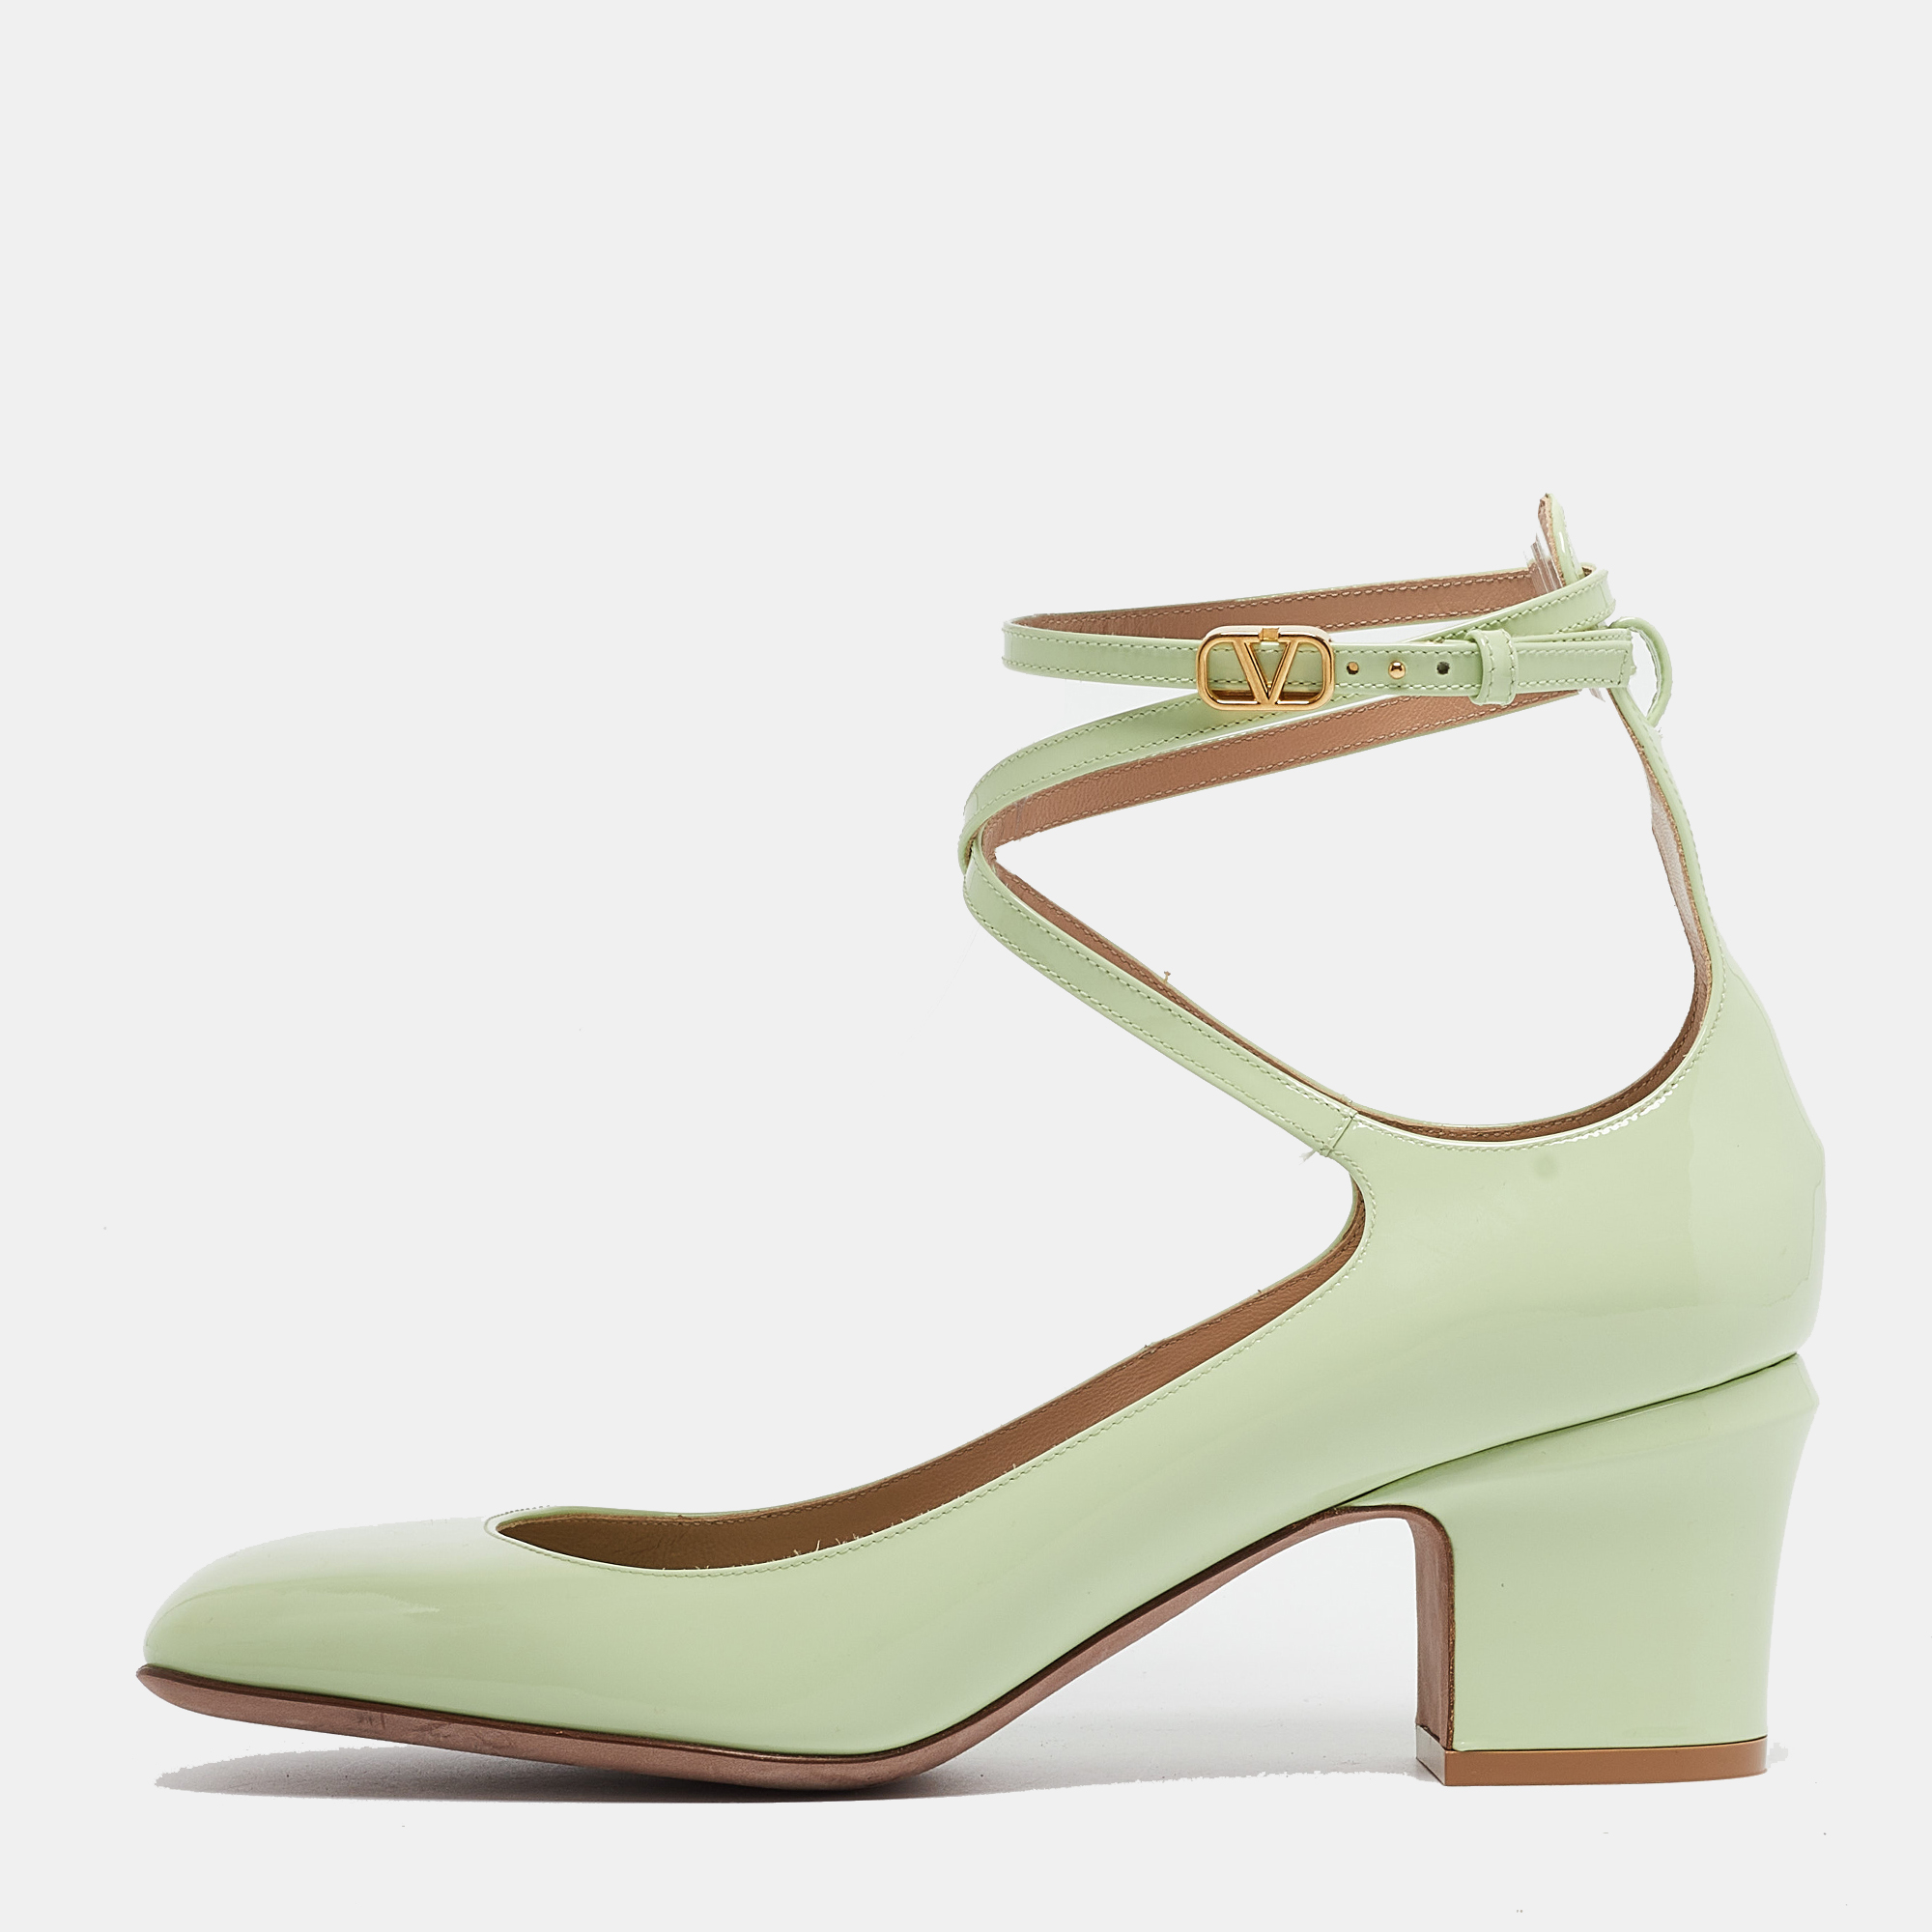 Valentino mint green patent leather tan-go pumps size 40